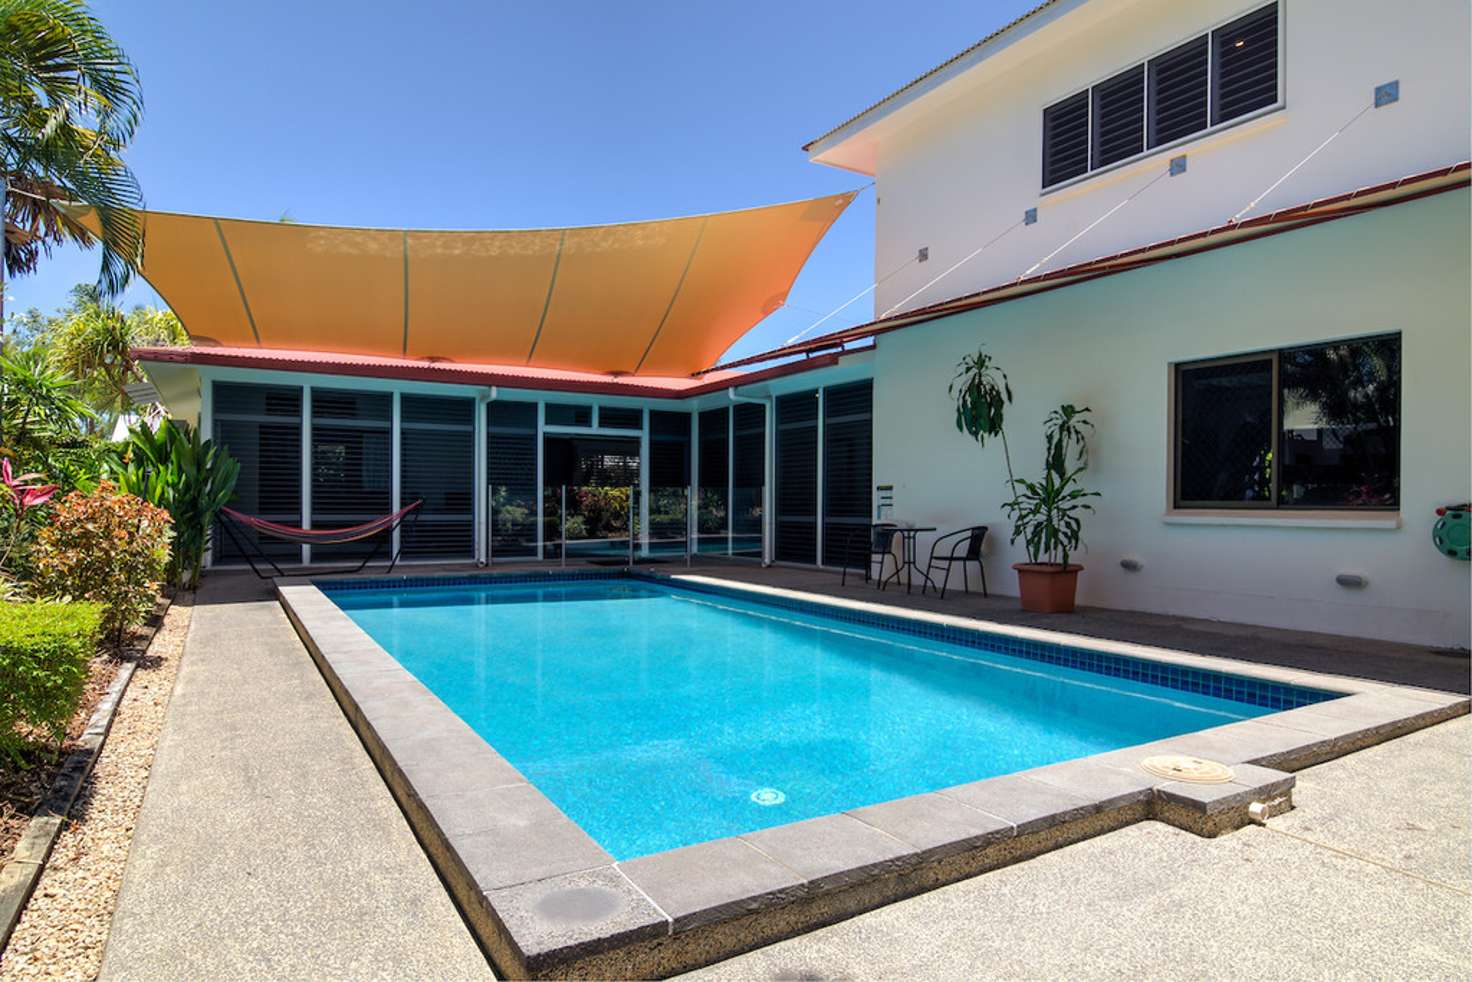 Main view of Homely house listing, 3 Endeavour Street, Port Douglas QLD 4877